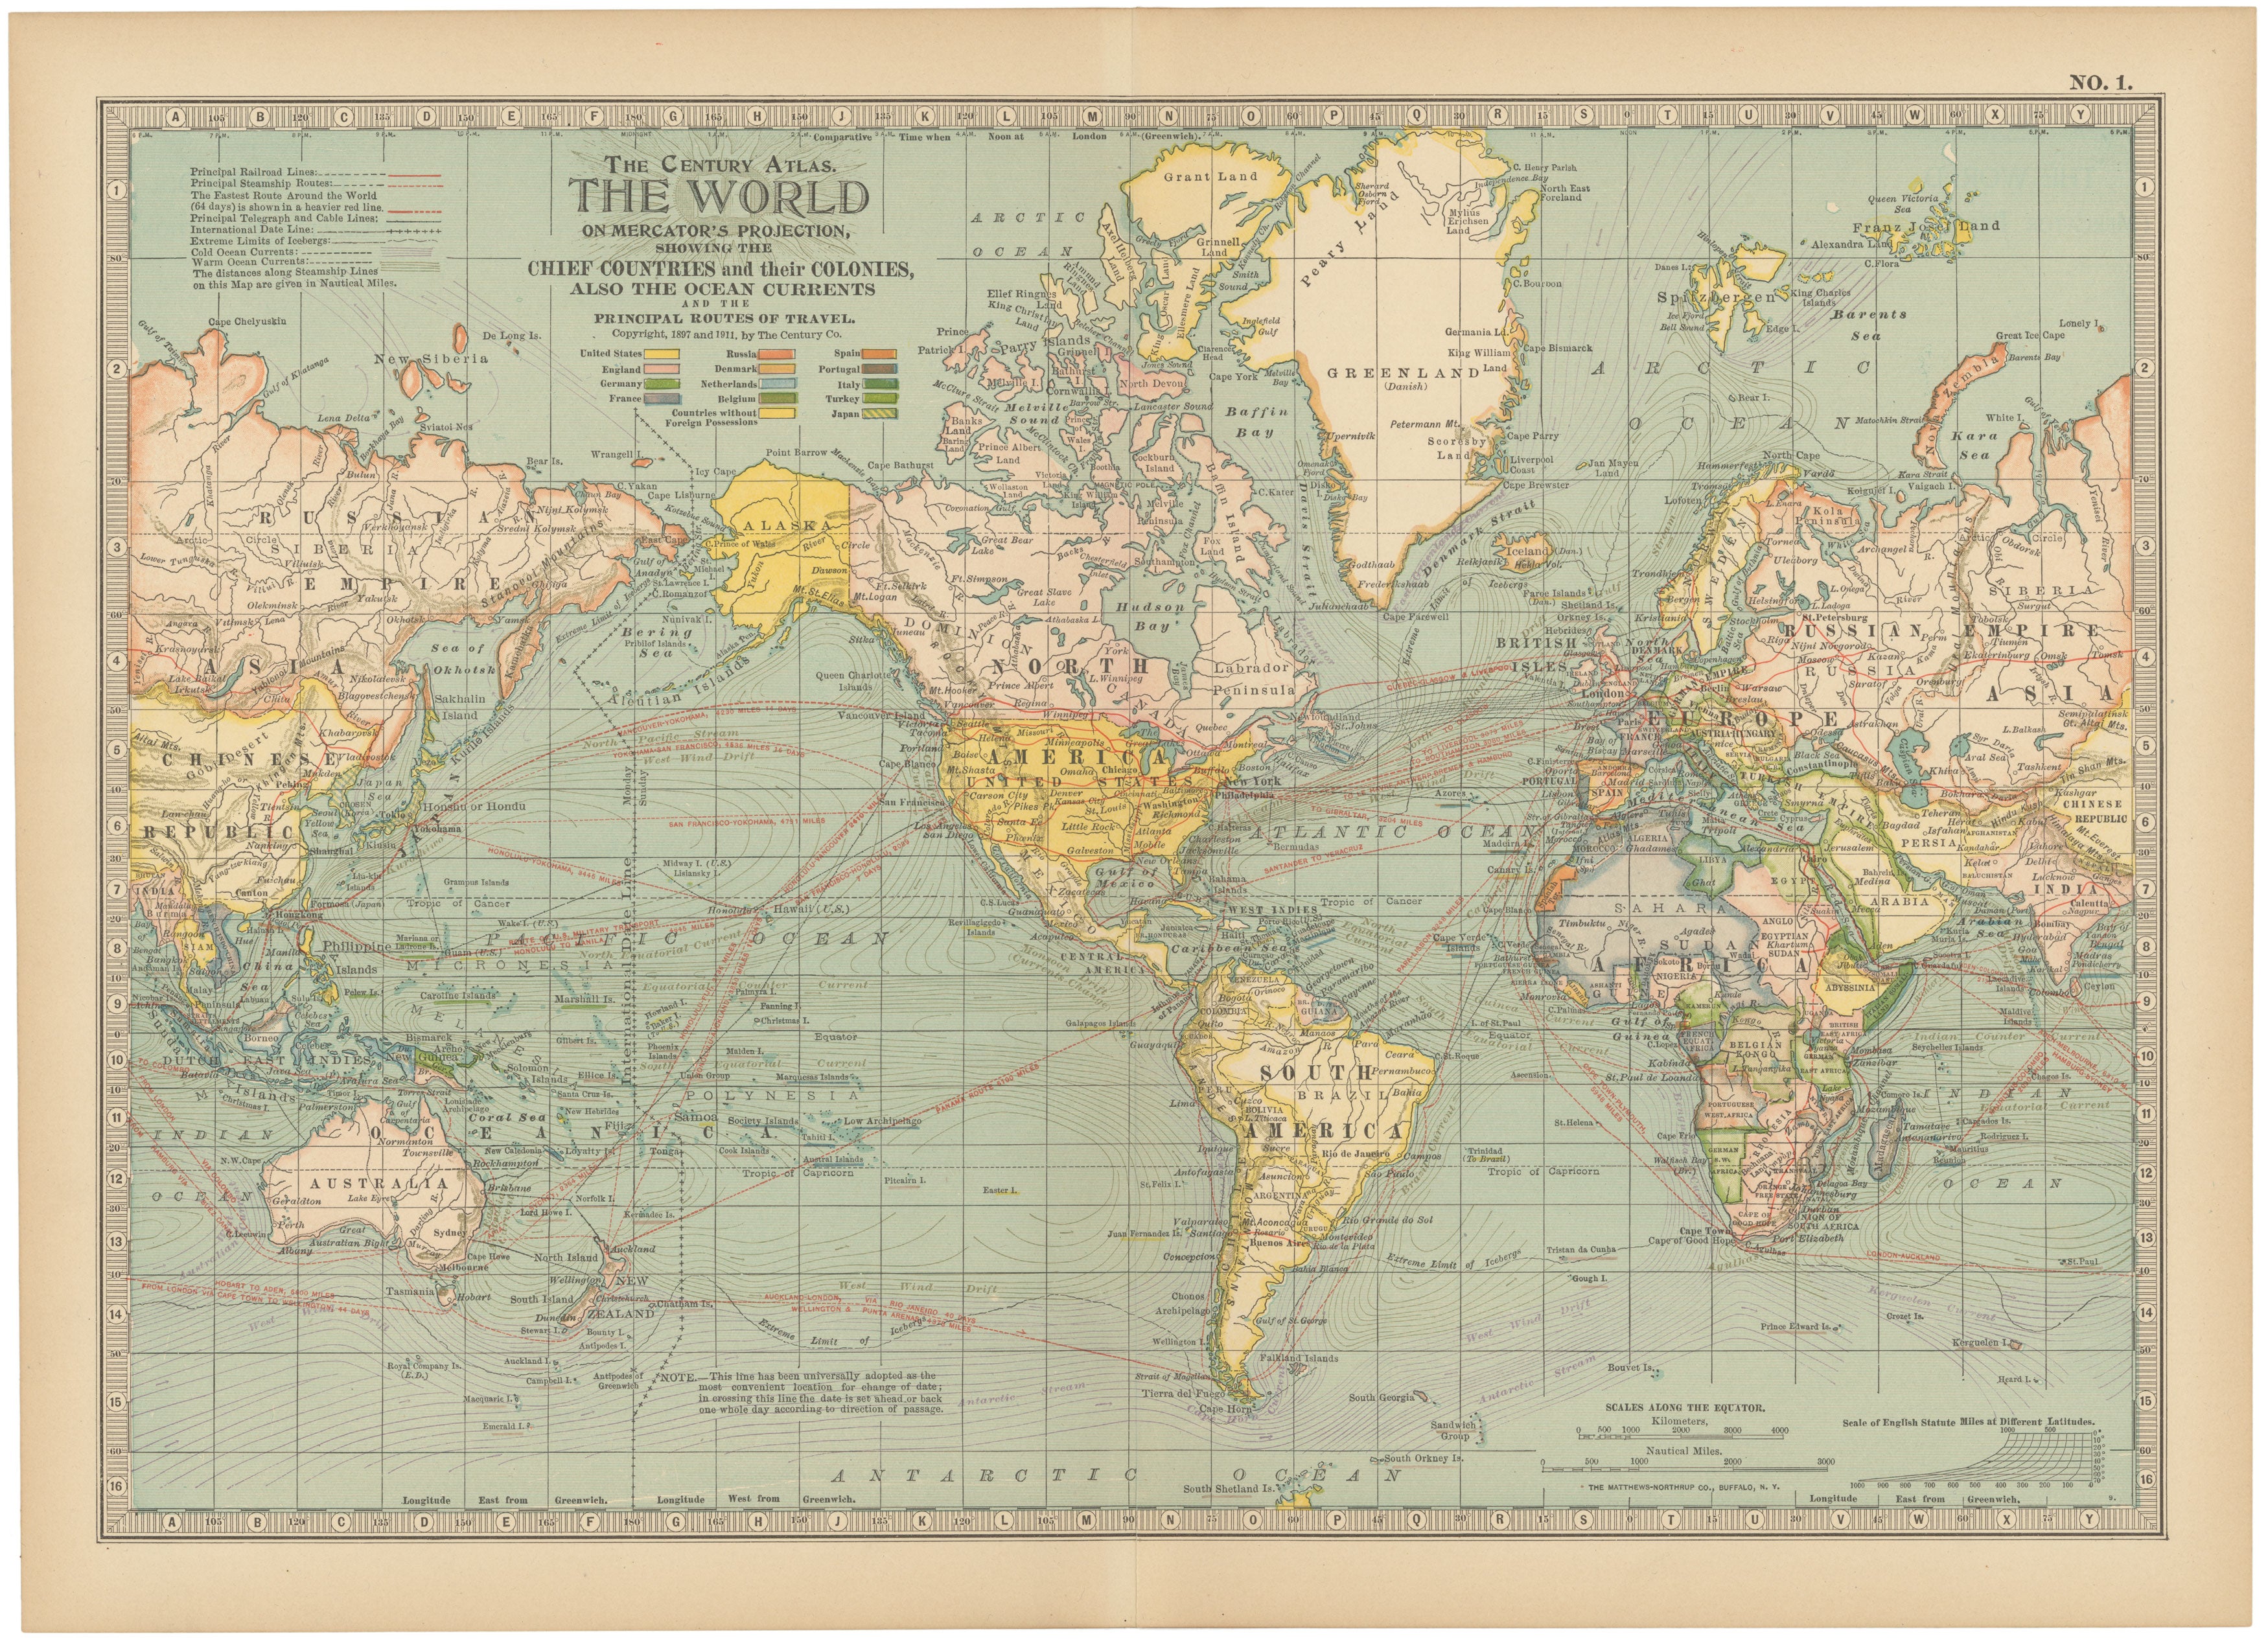 Antique Map of the World